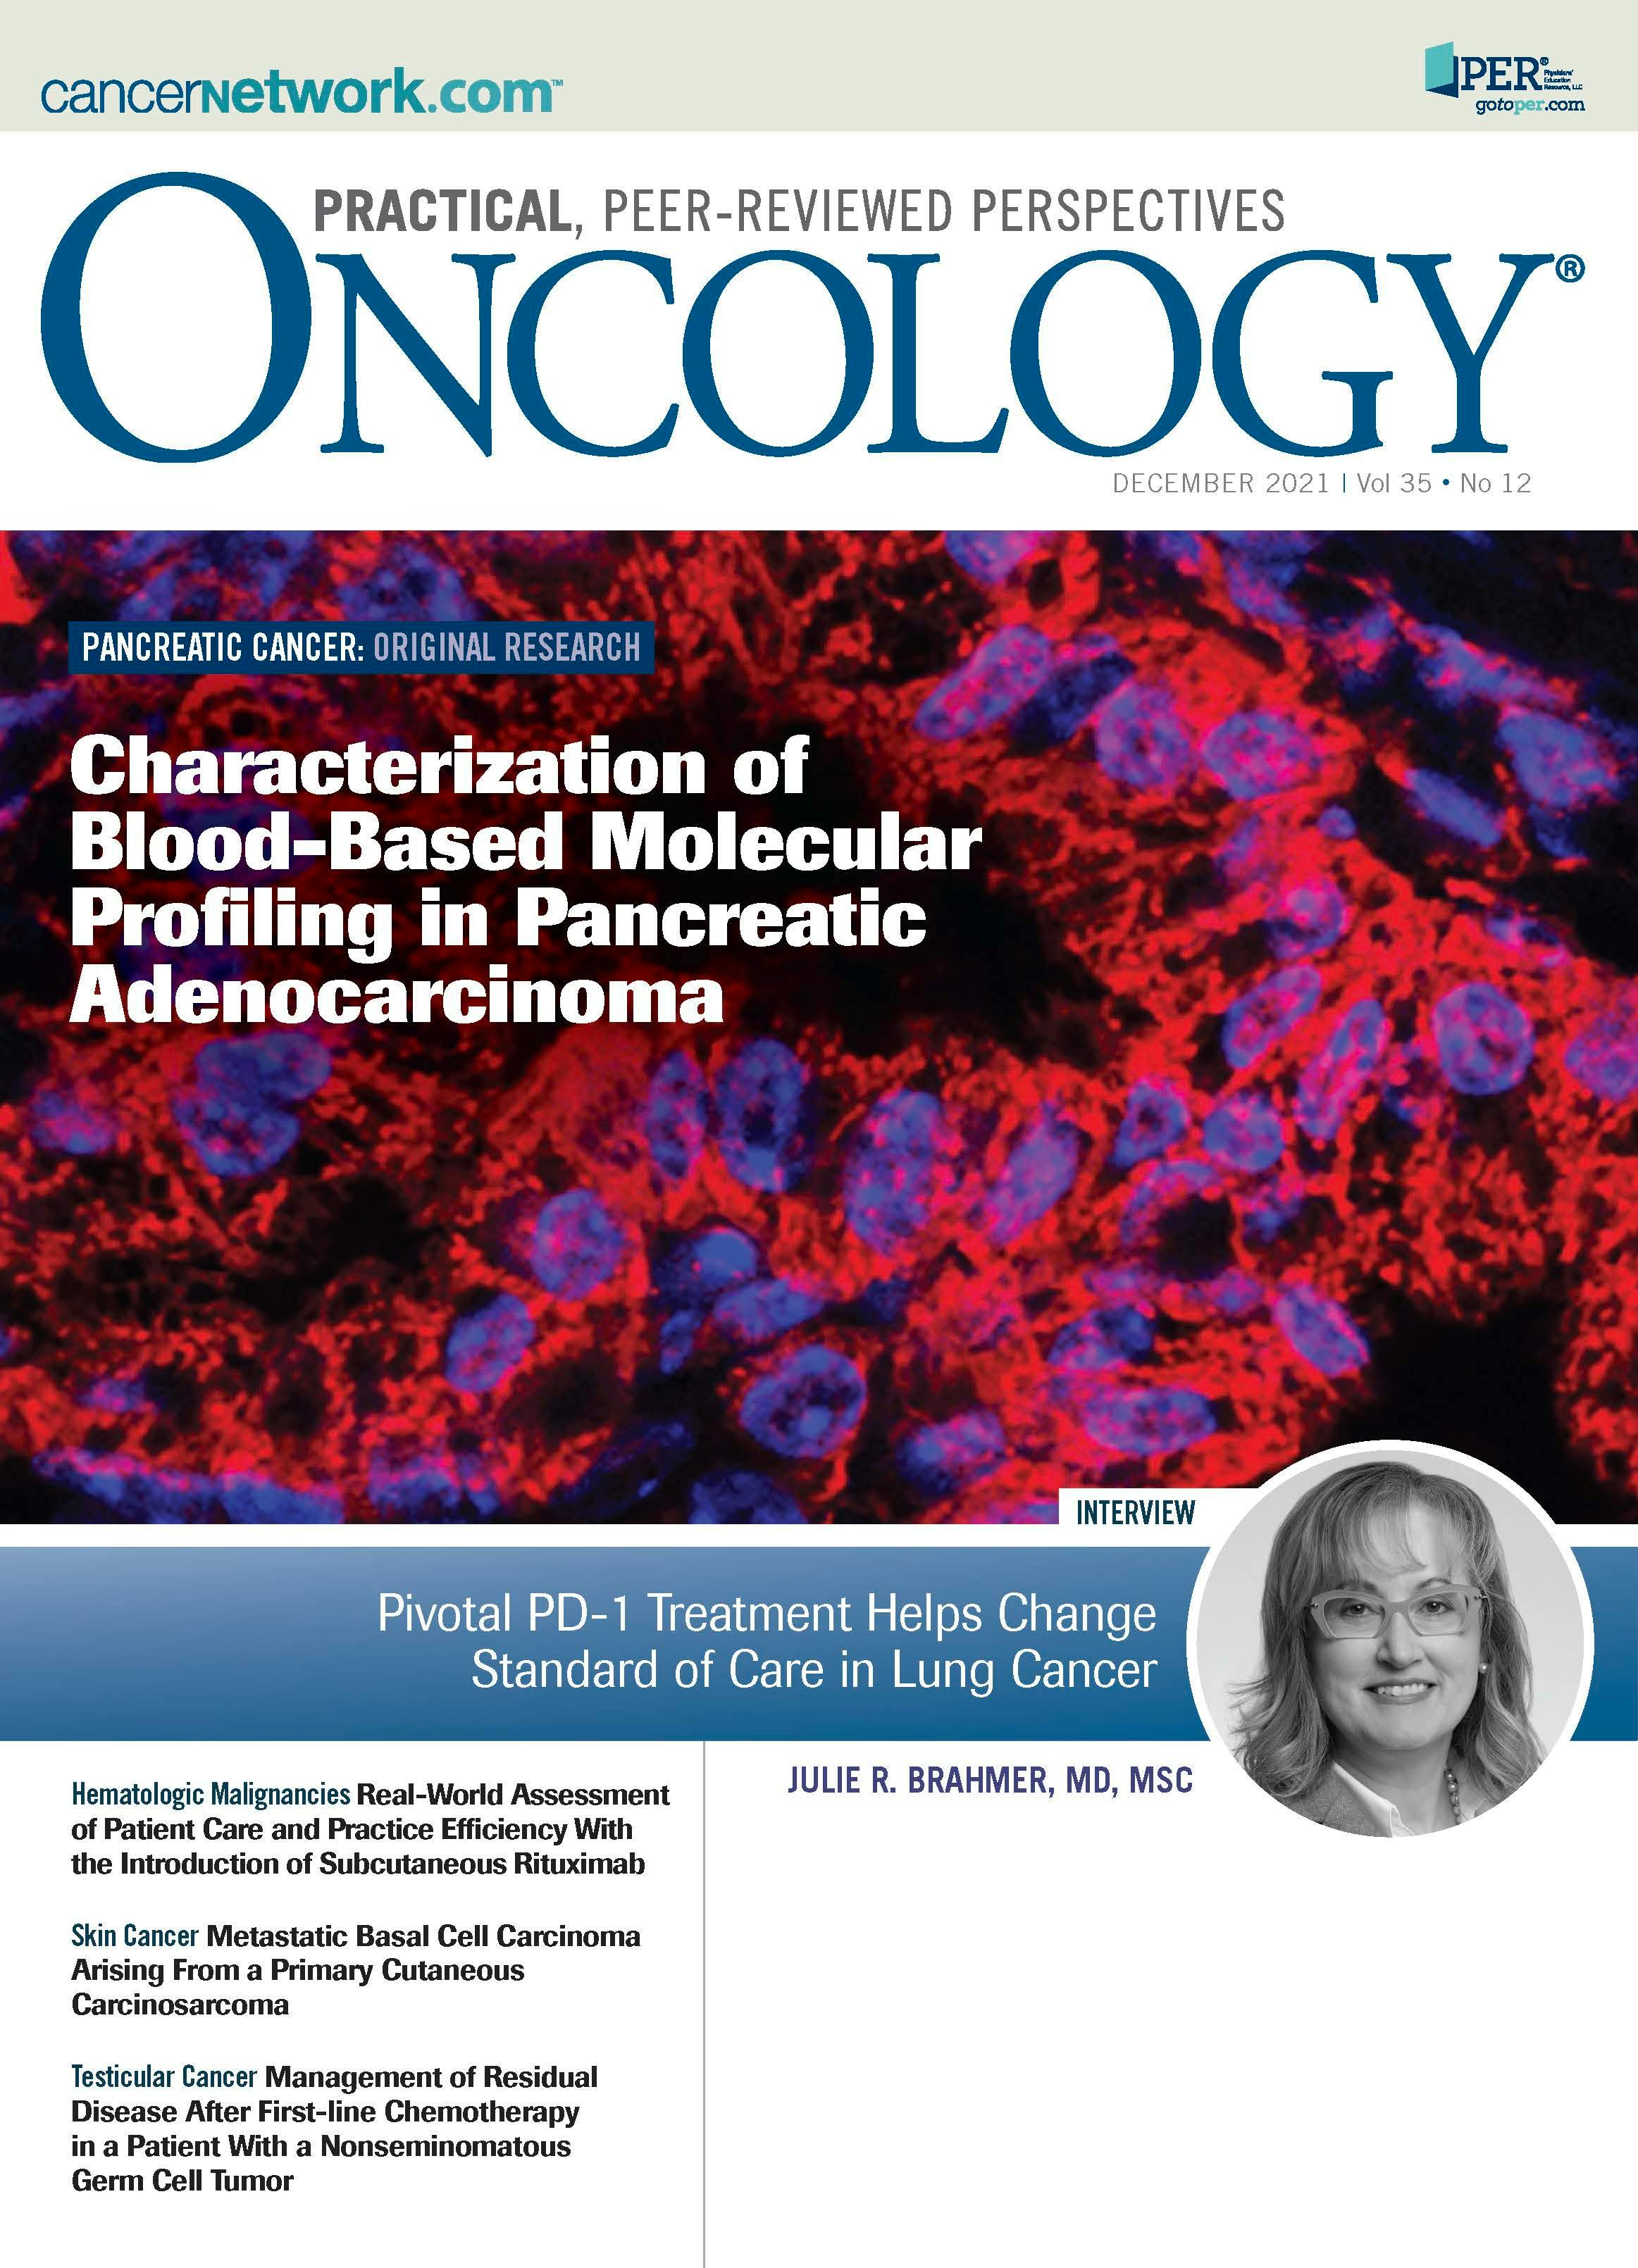 ONCOLOGY Vol 35, Issue 12